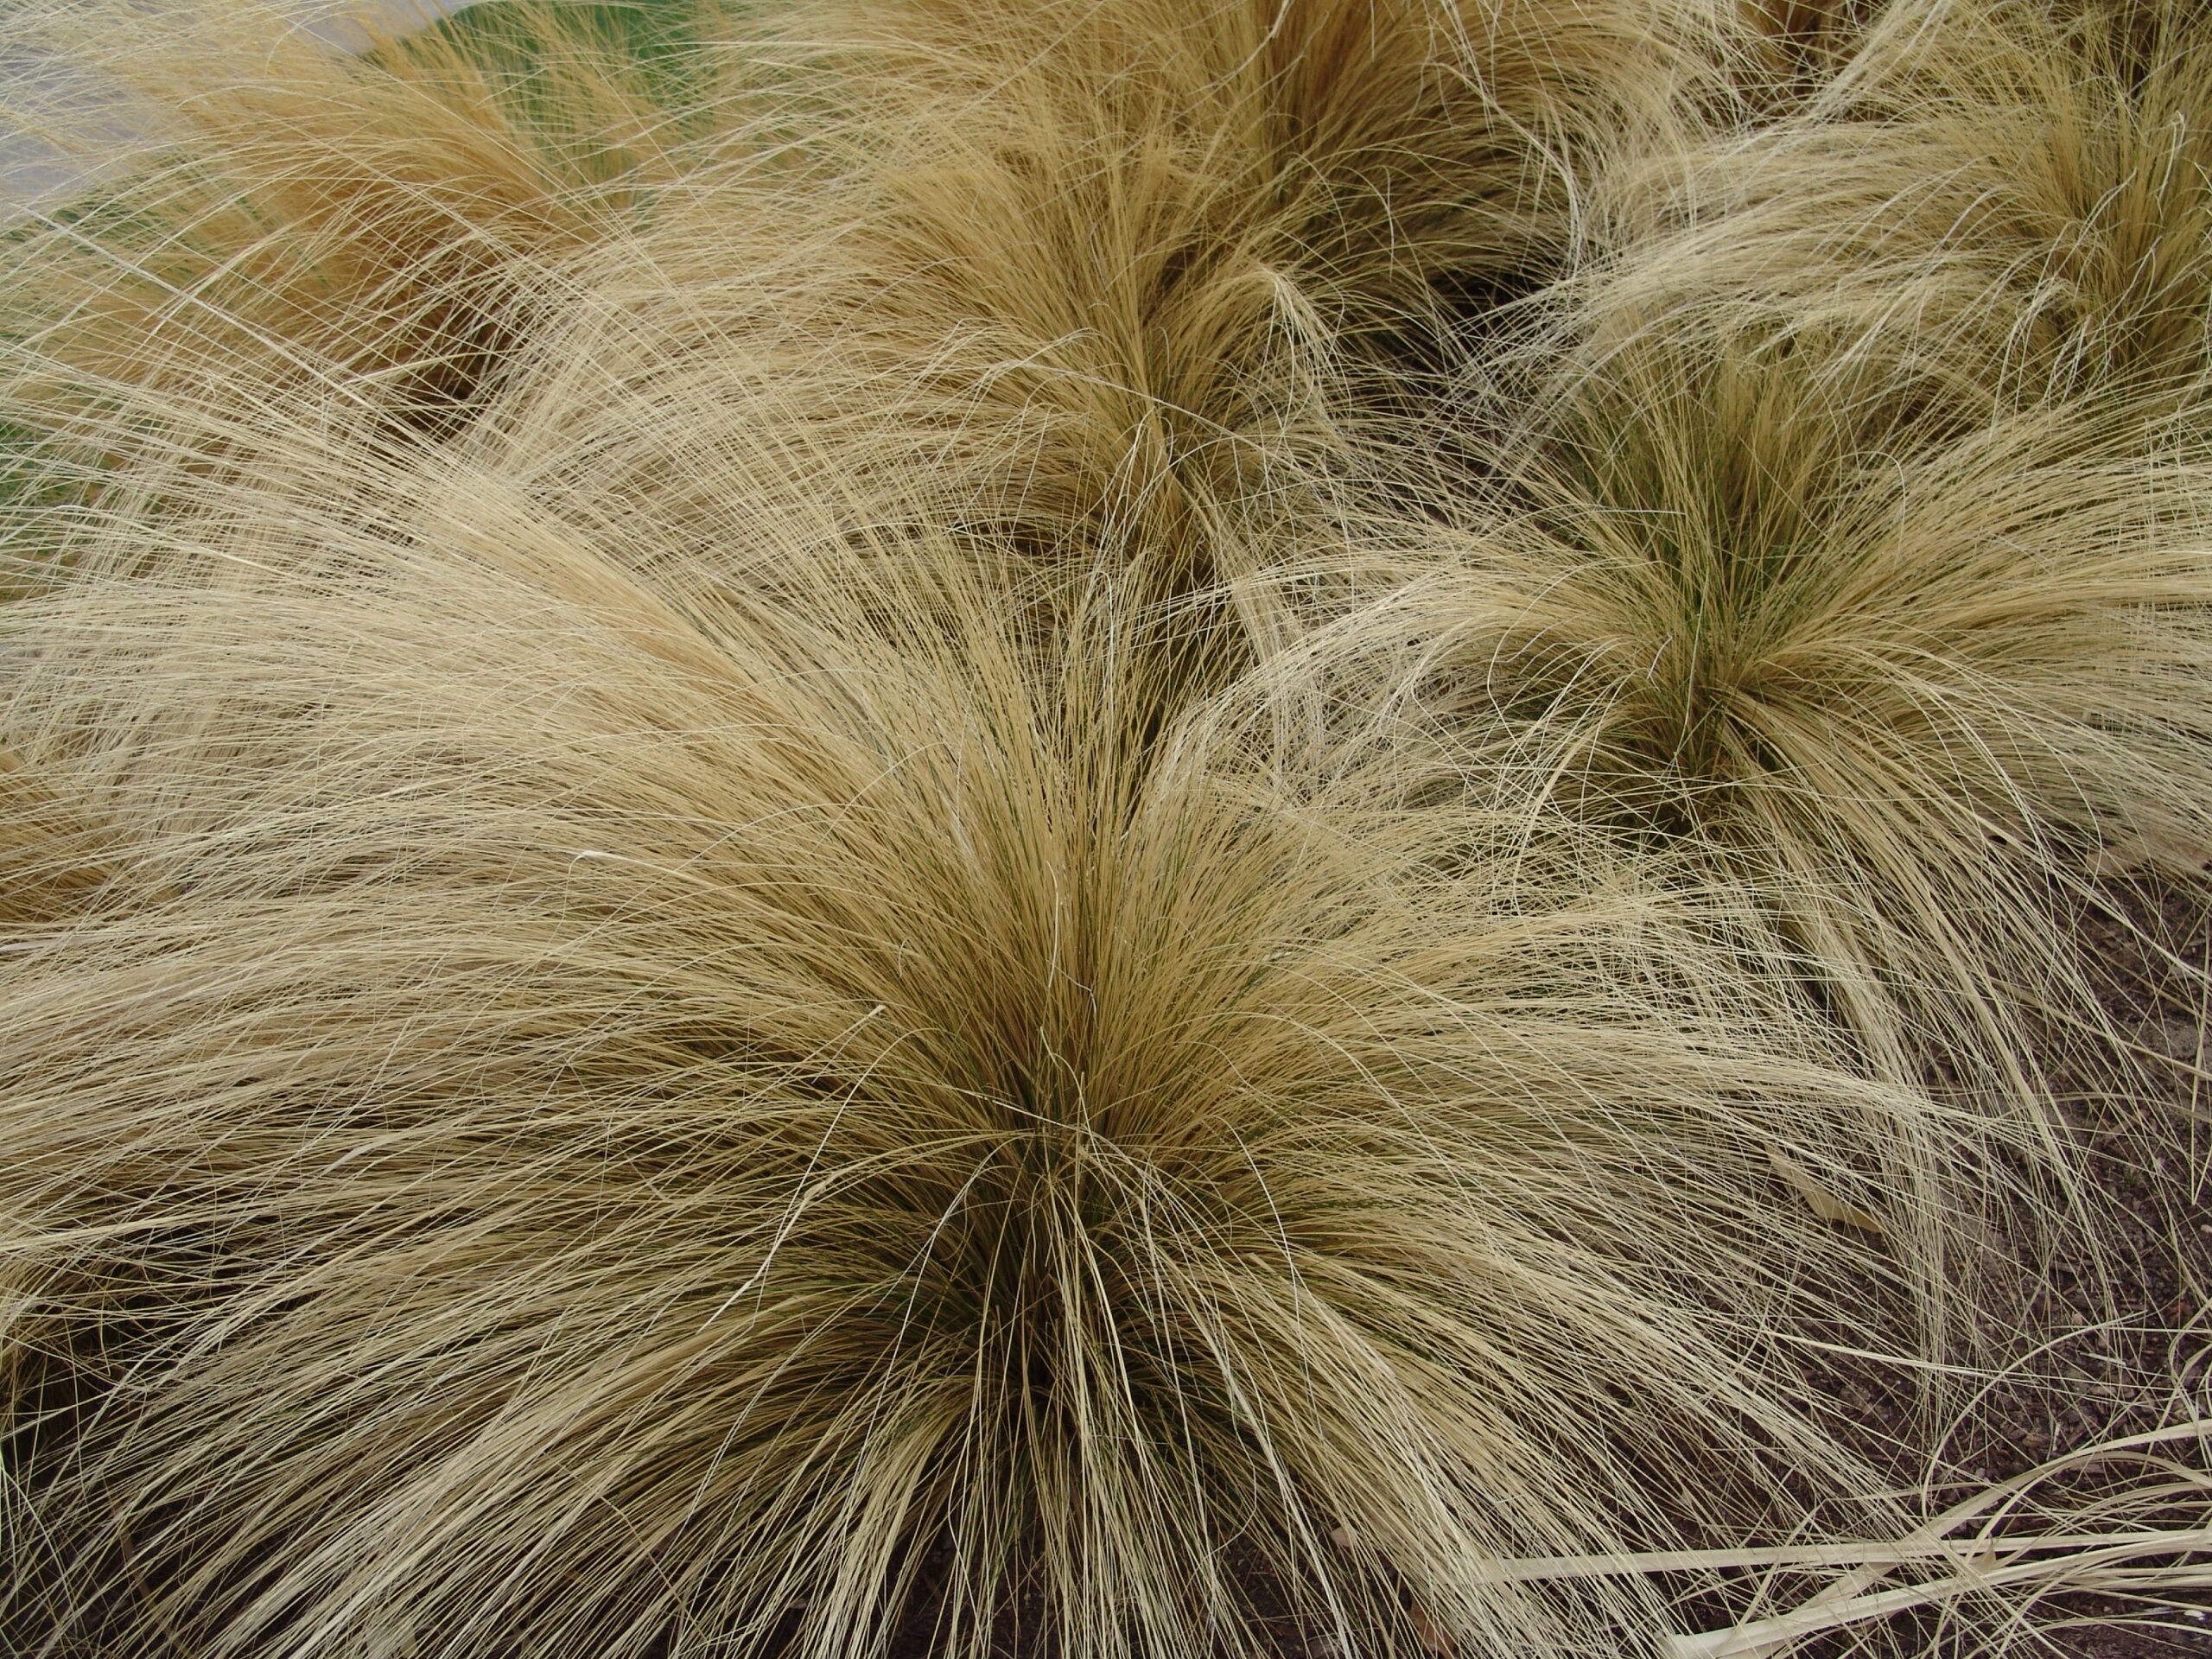 Photograph of clumps of Mexican feathergrass. The photo shows bunches of yellow grass with arcing leaves.